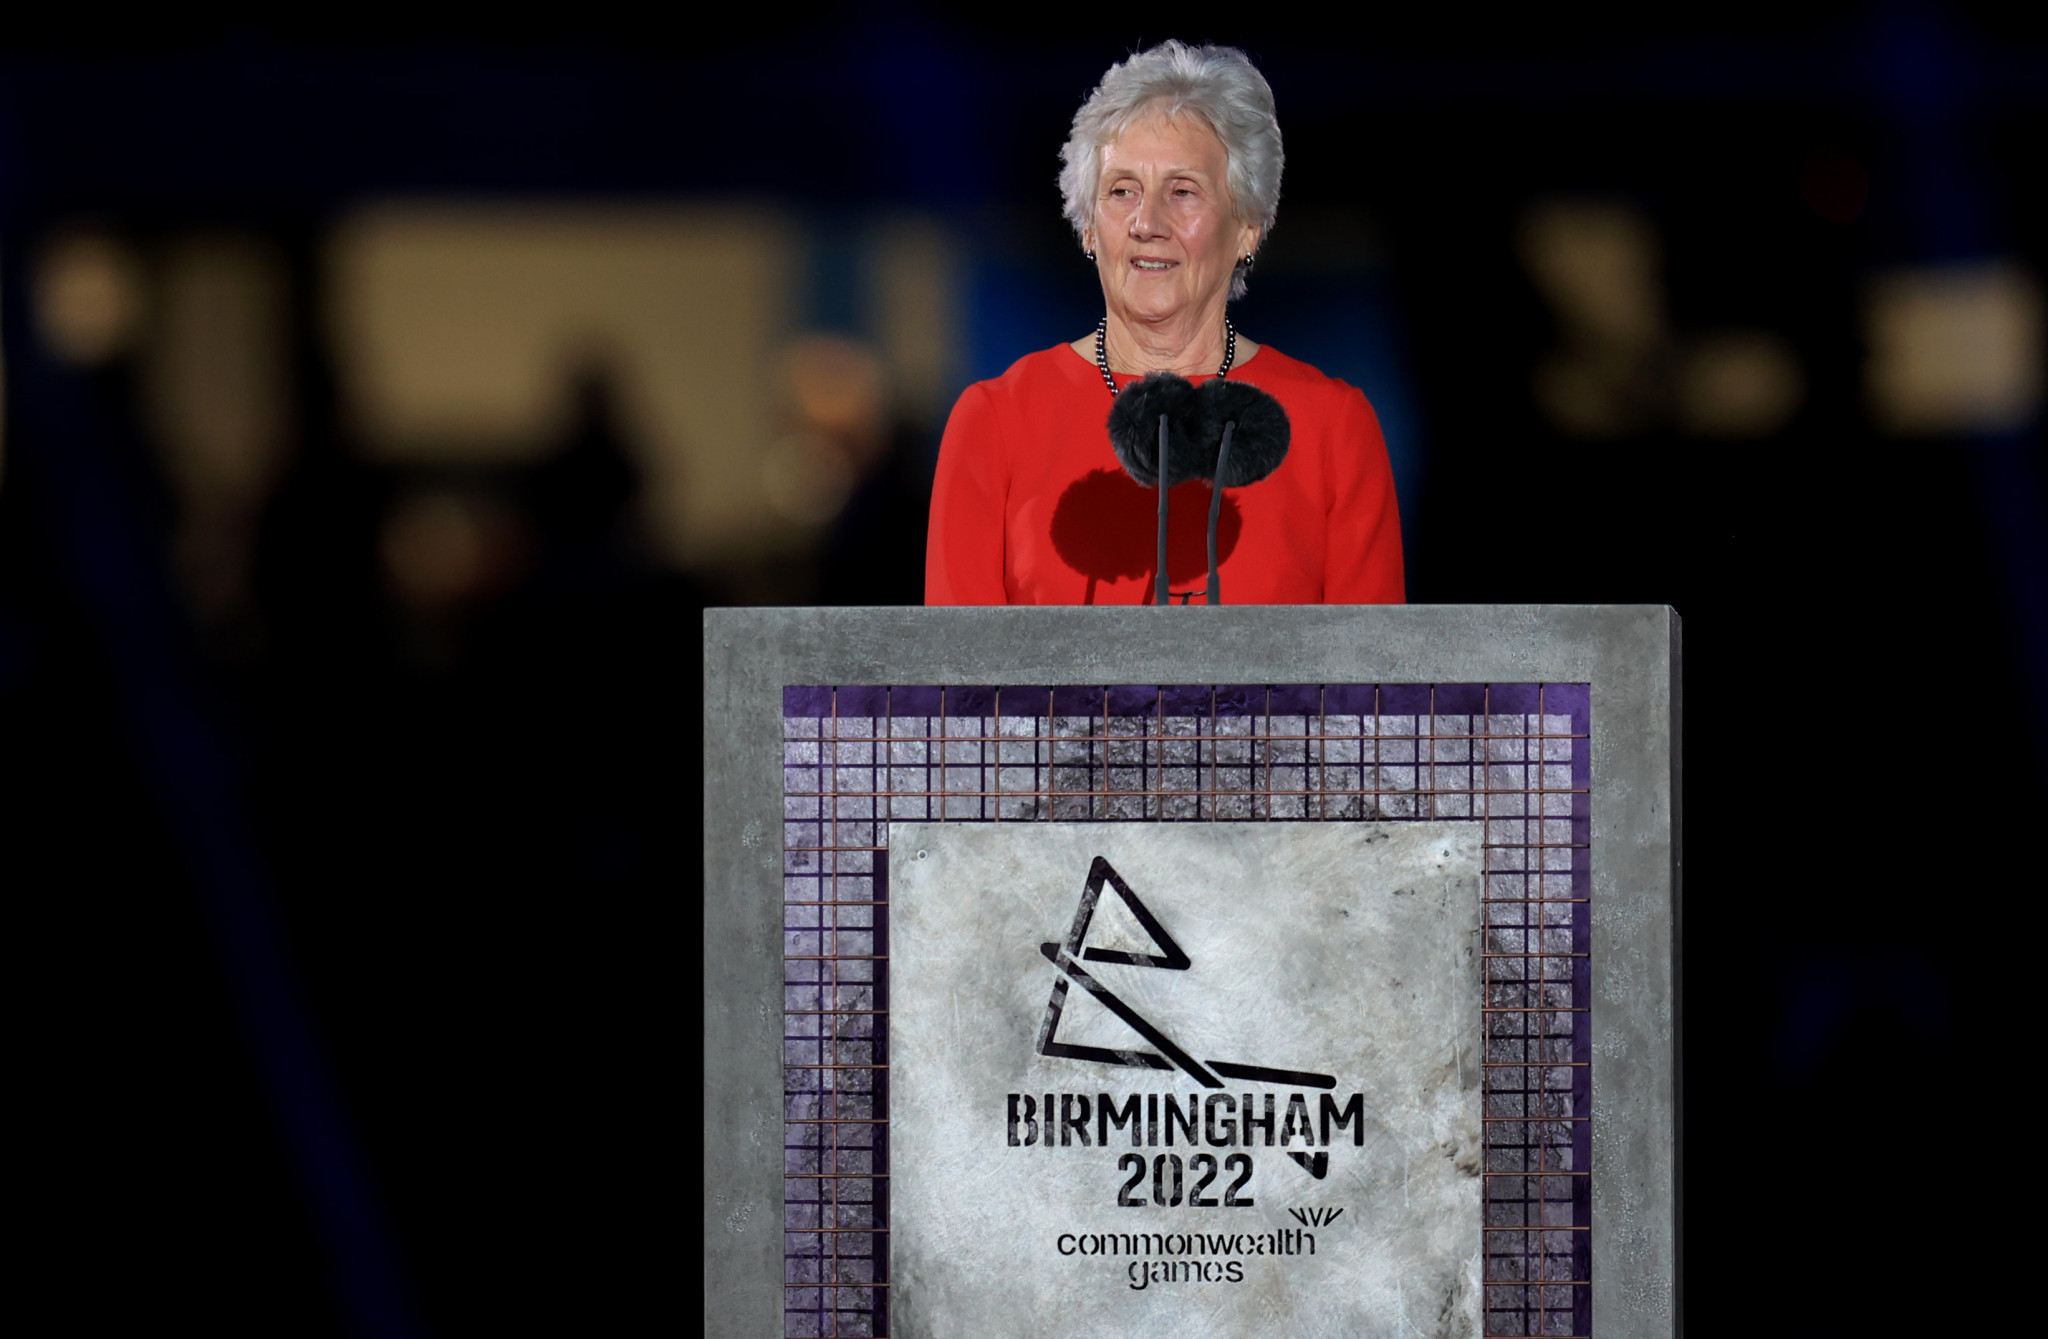 CGF President lauds "bold, buzzing and absolutely brilliant" Games at Birmingham 2022 Closing Ceremony